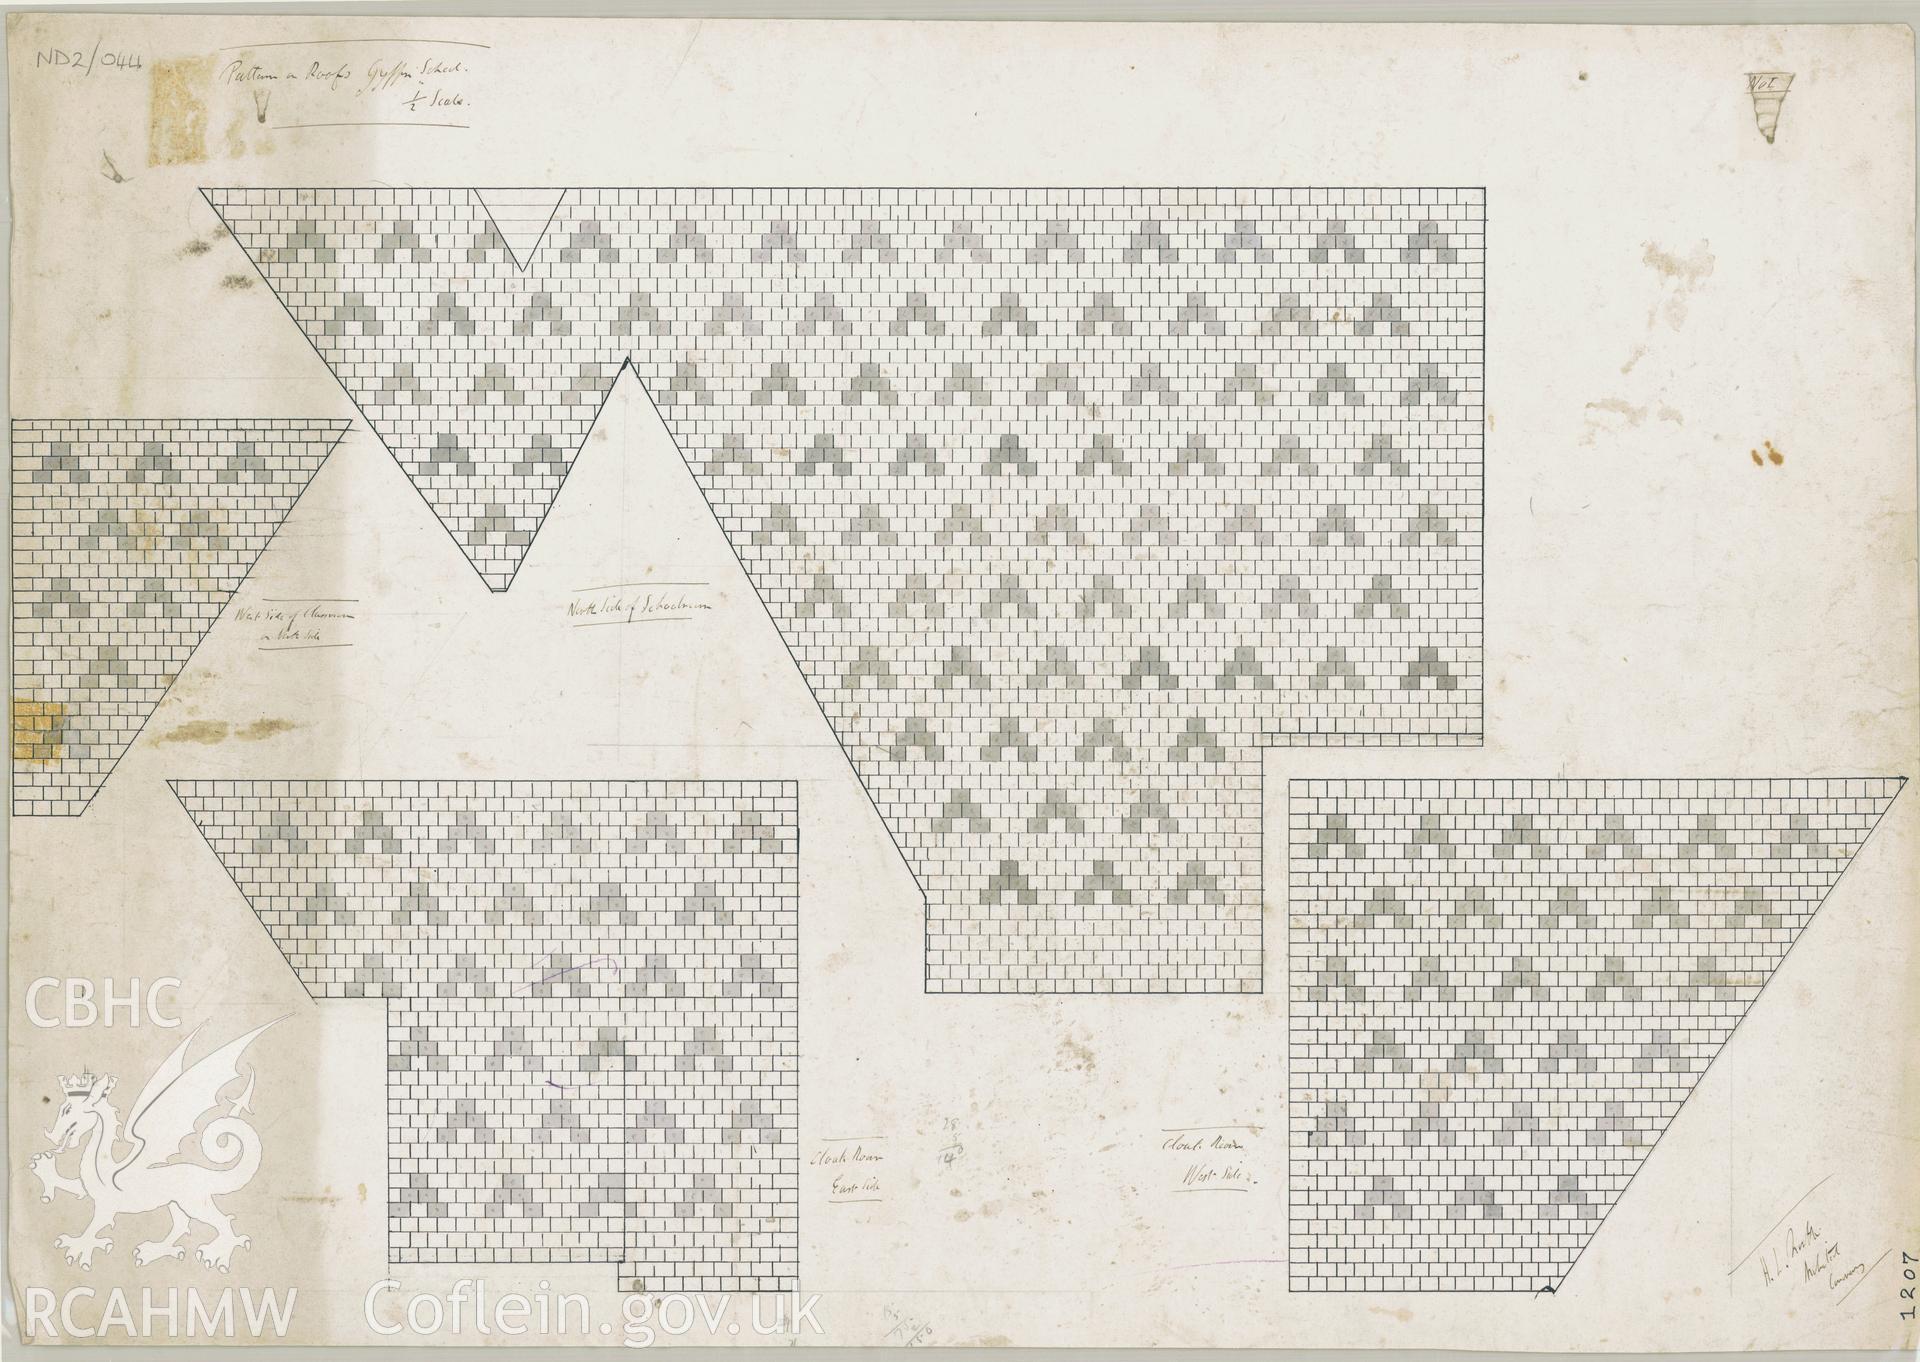 Plans for the pattern of decorative roofing for Gyffin National School, scale two feet to one inch, ink with grey wash on paper.